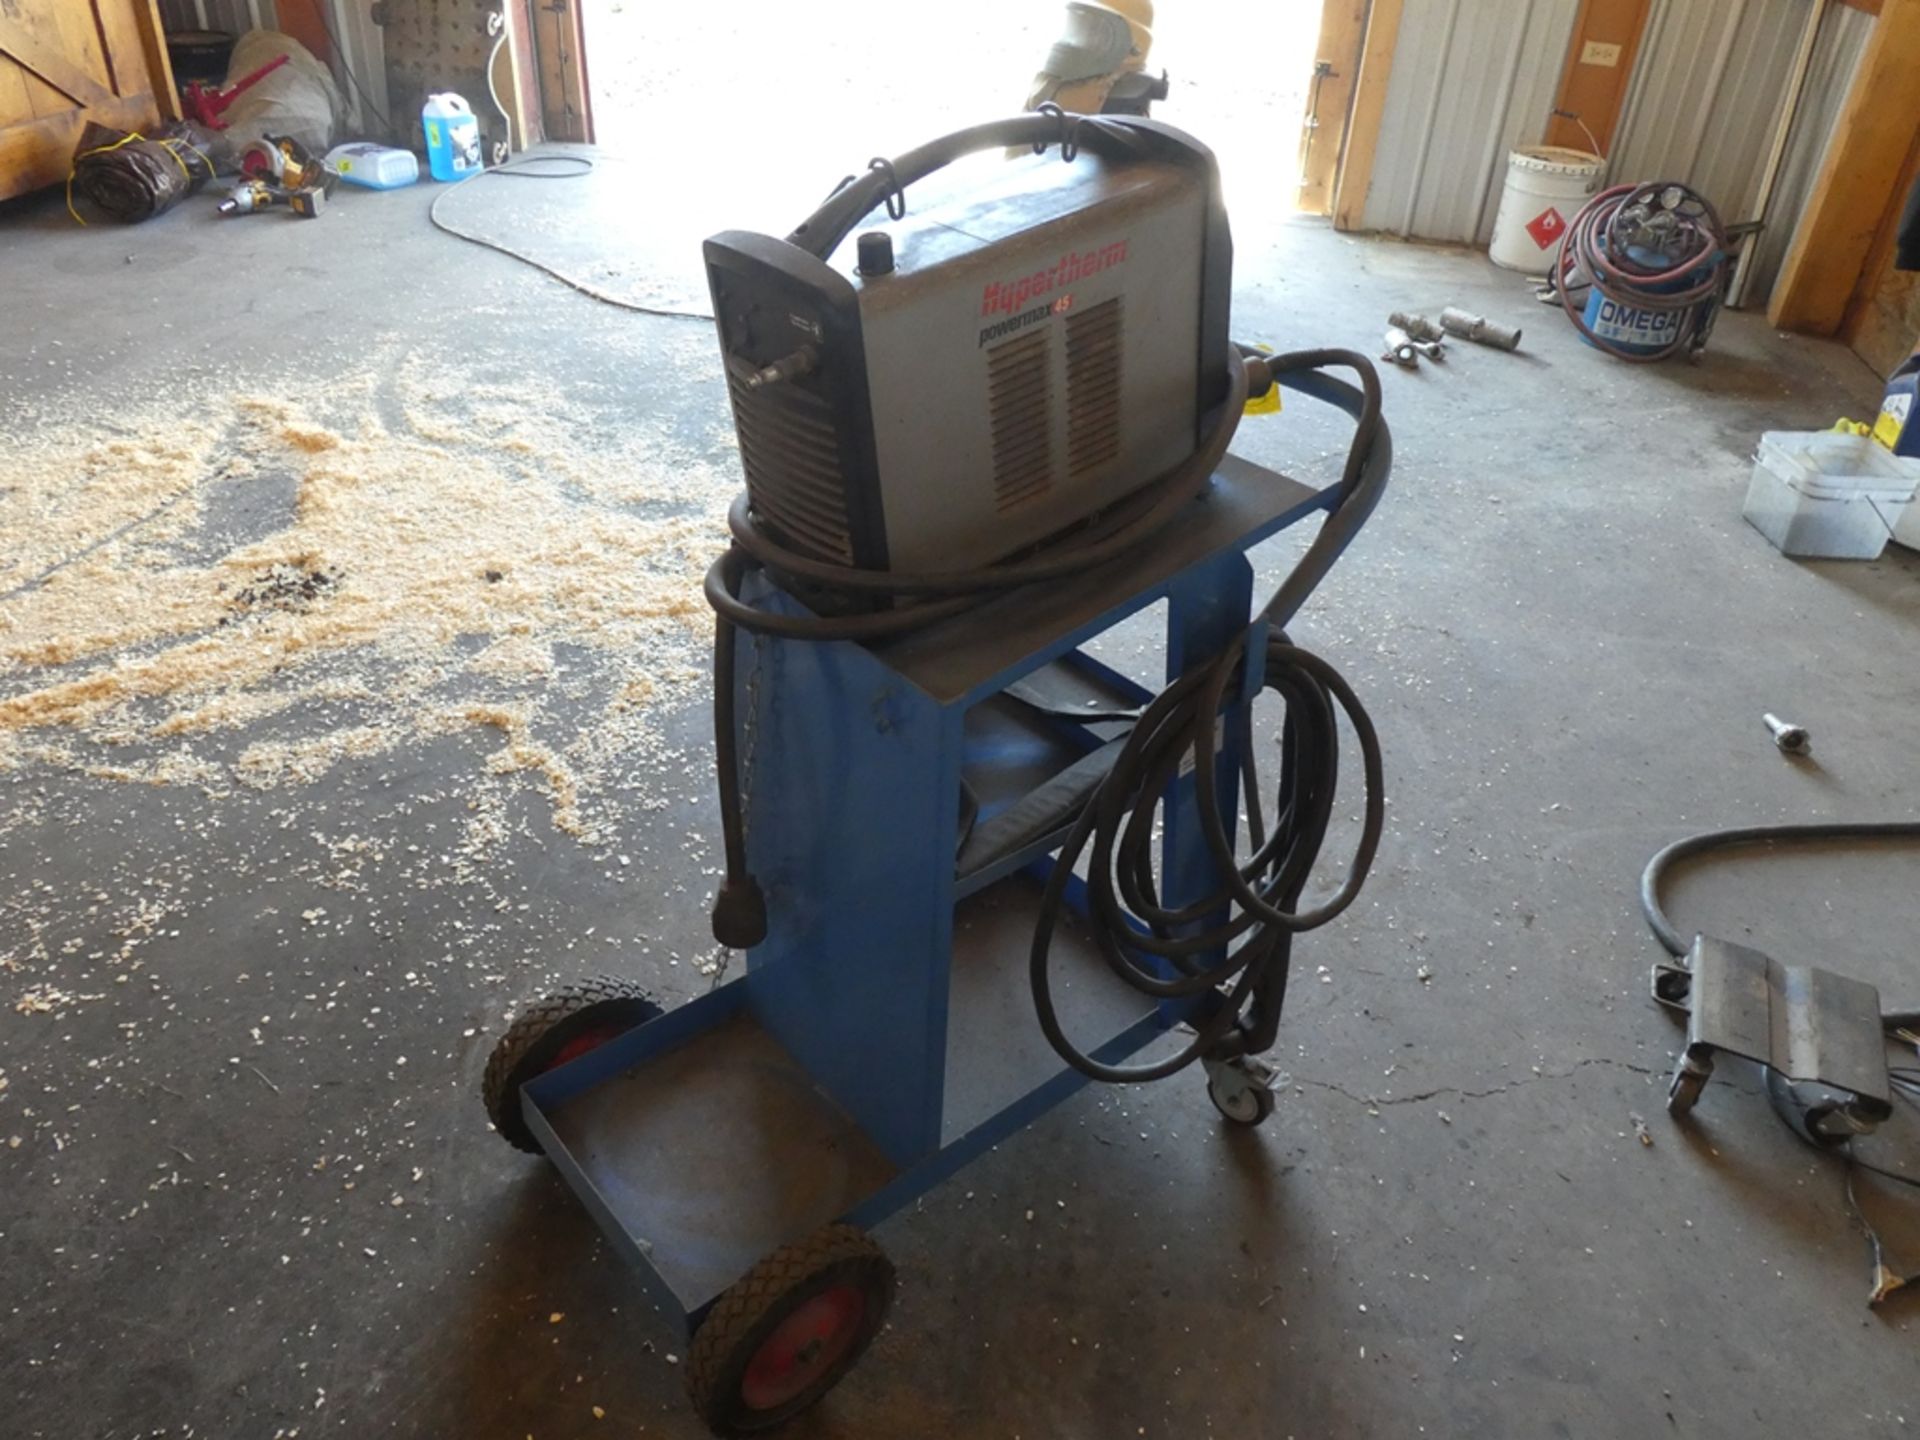 HYPER THERM POWER MAX 45 PLASMA CUTTER W/ CART S/N 454837 - Image 2 of 2